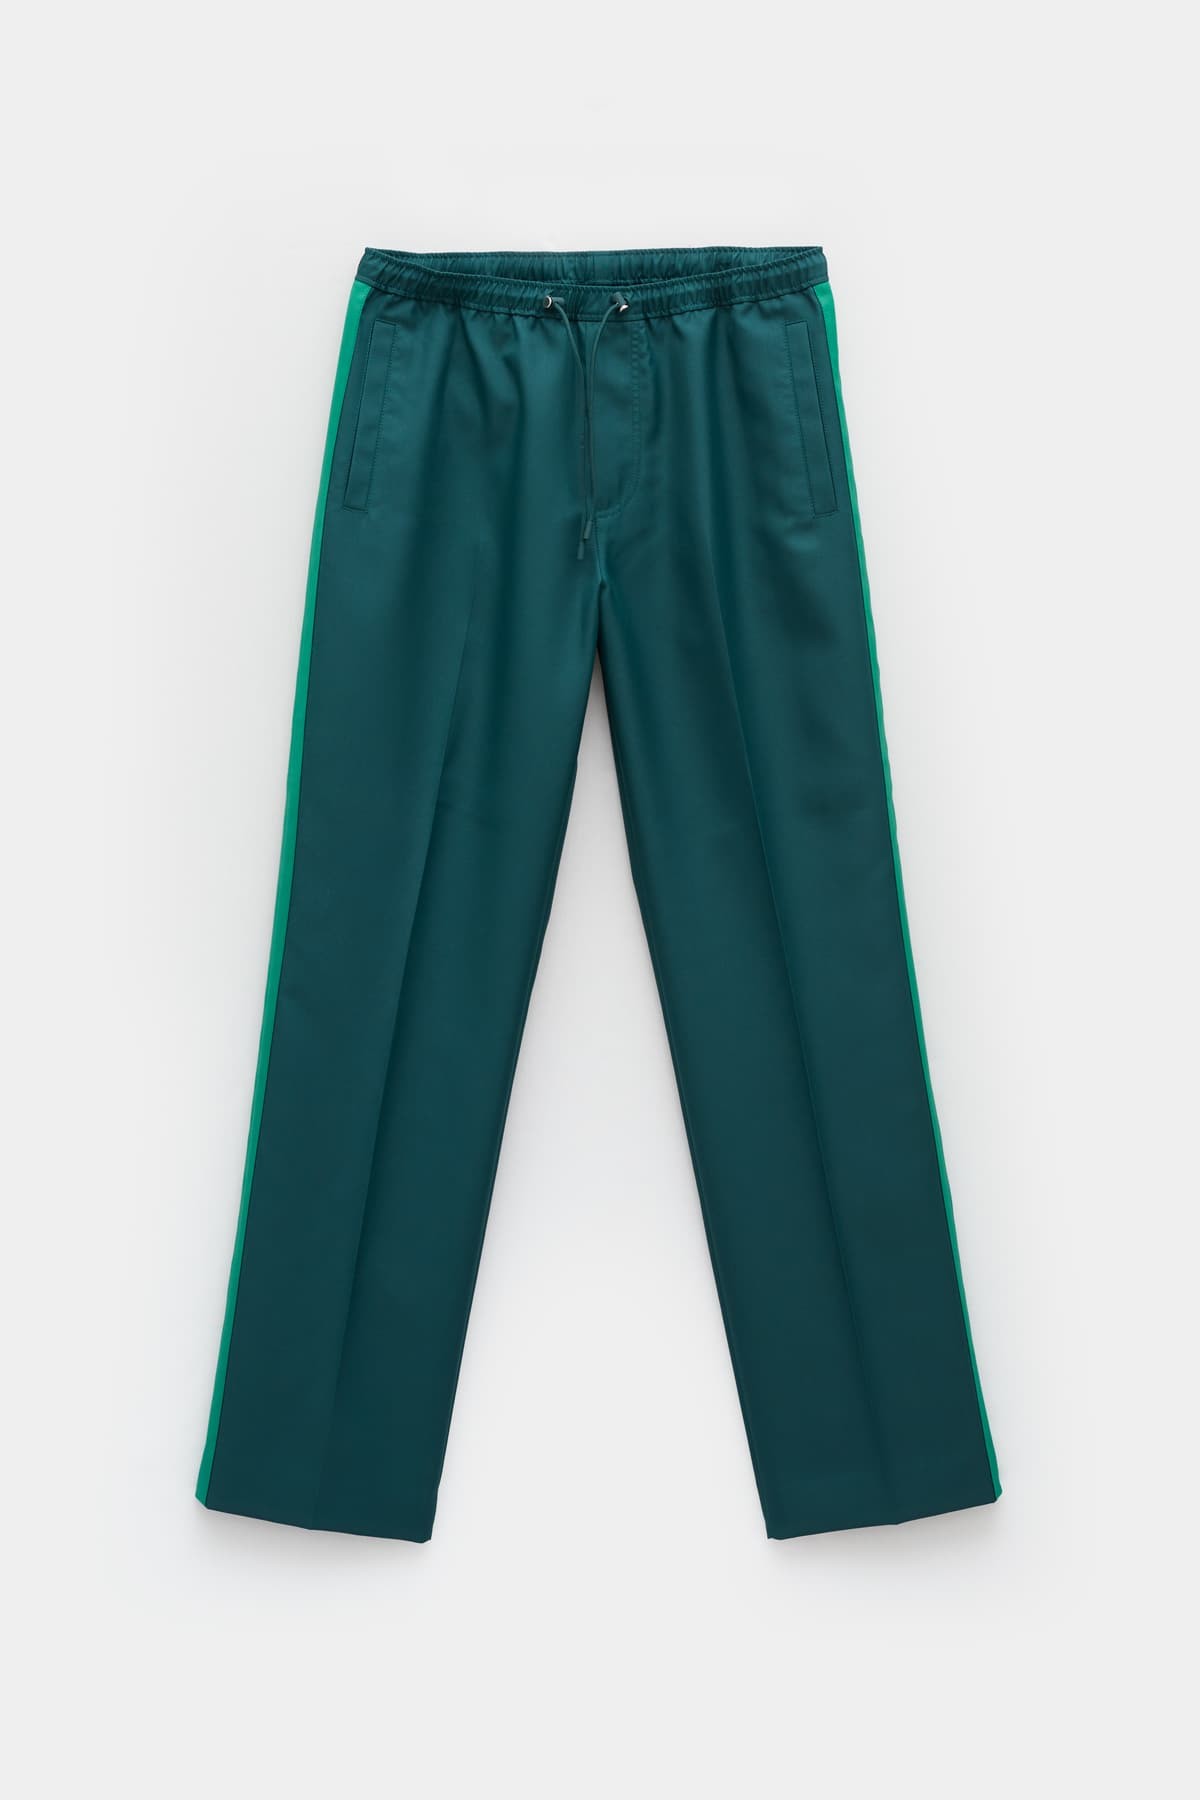 LANVIN FOREST TRACK PANTS IAMNUE